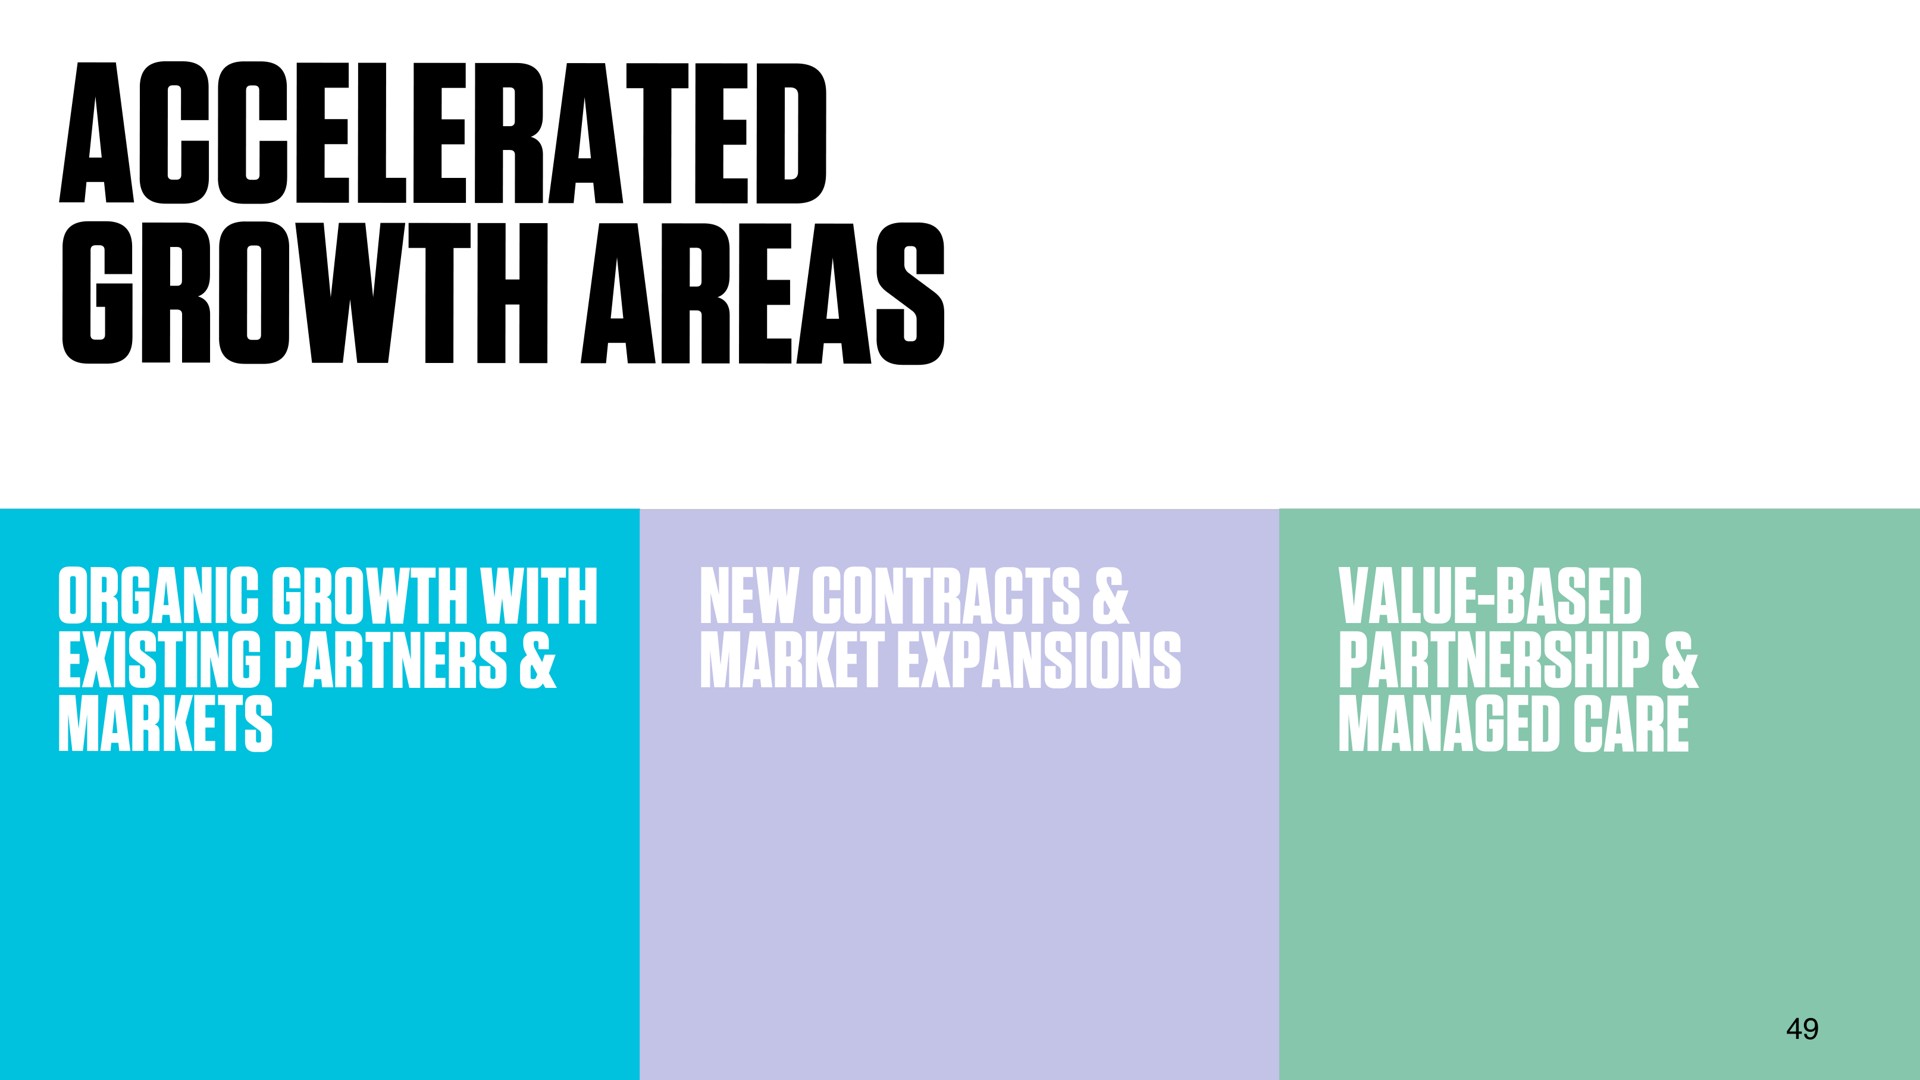 accelerated growth areas at existing partners markets | DocGo